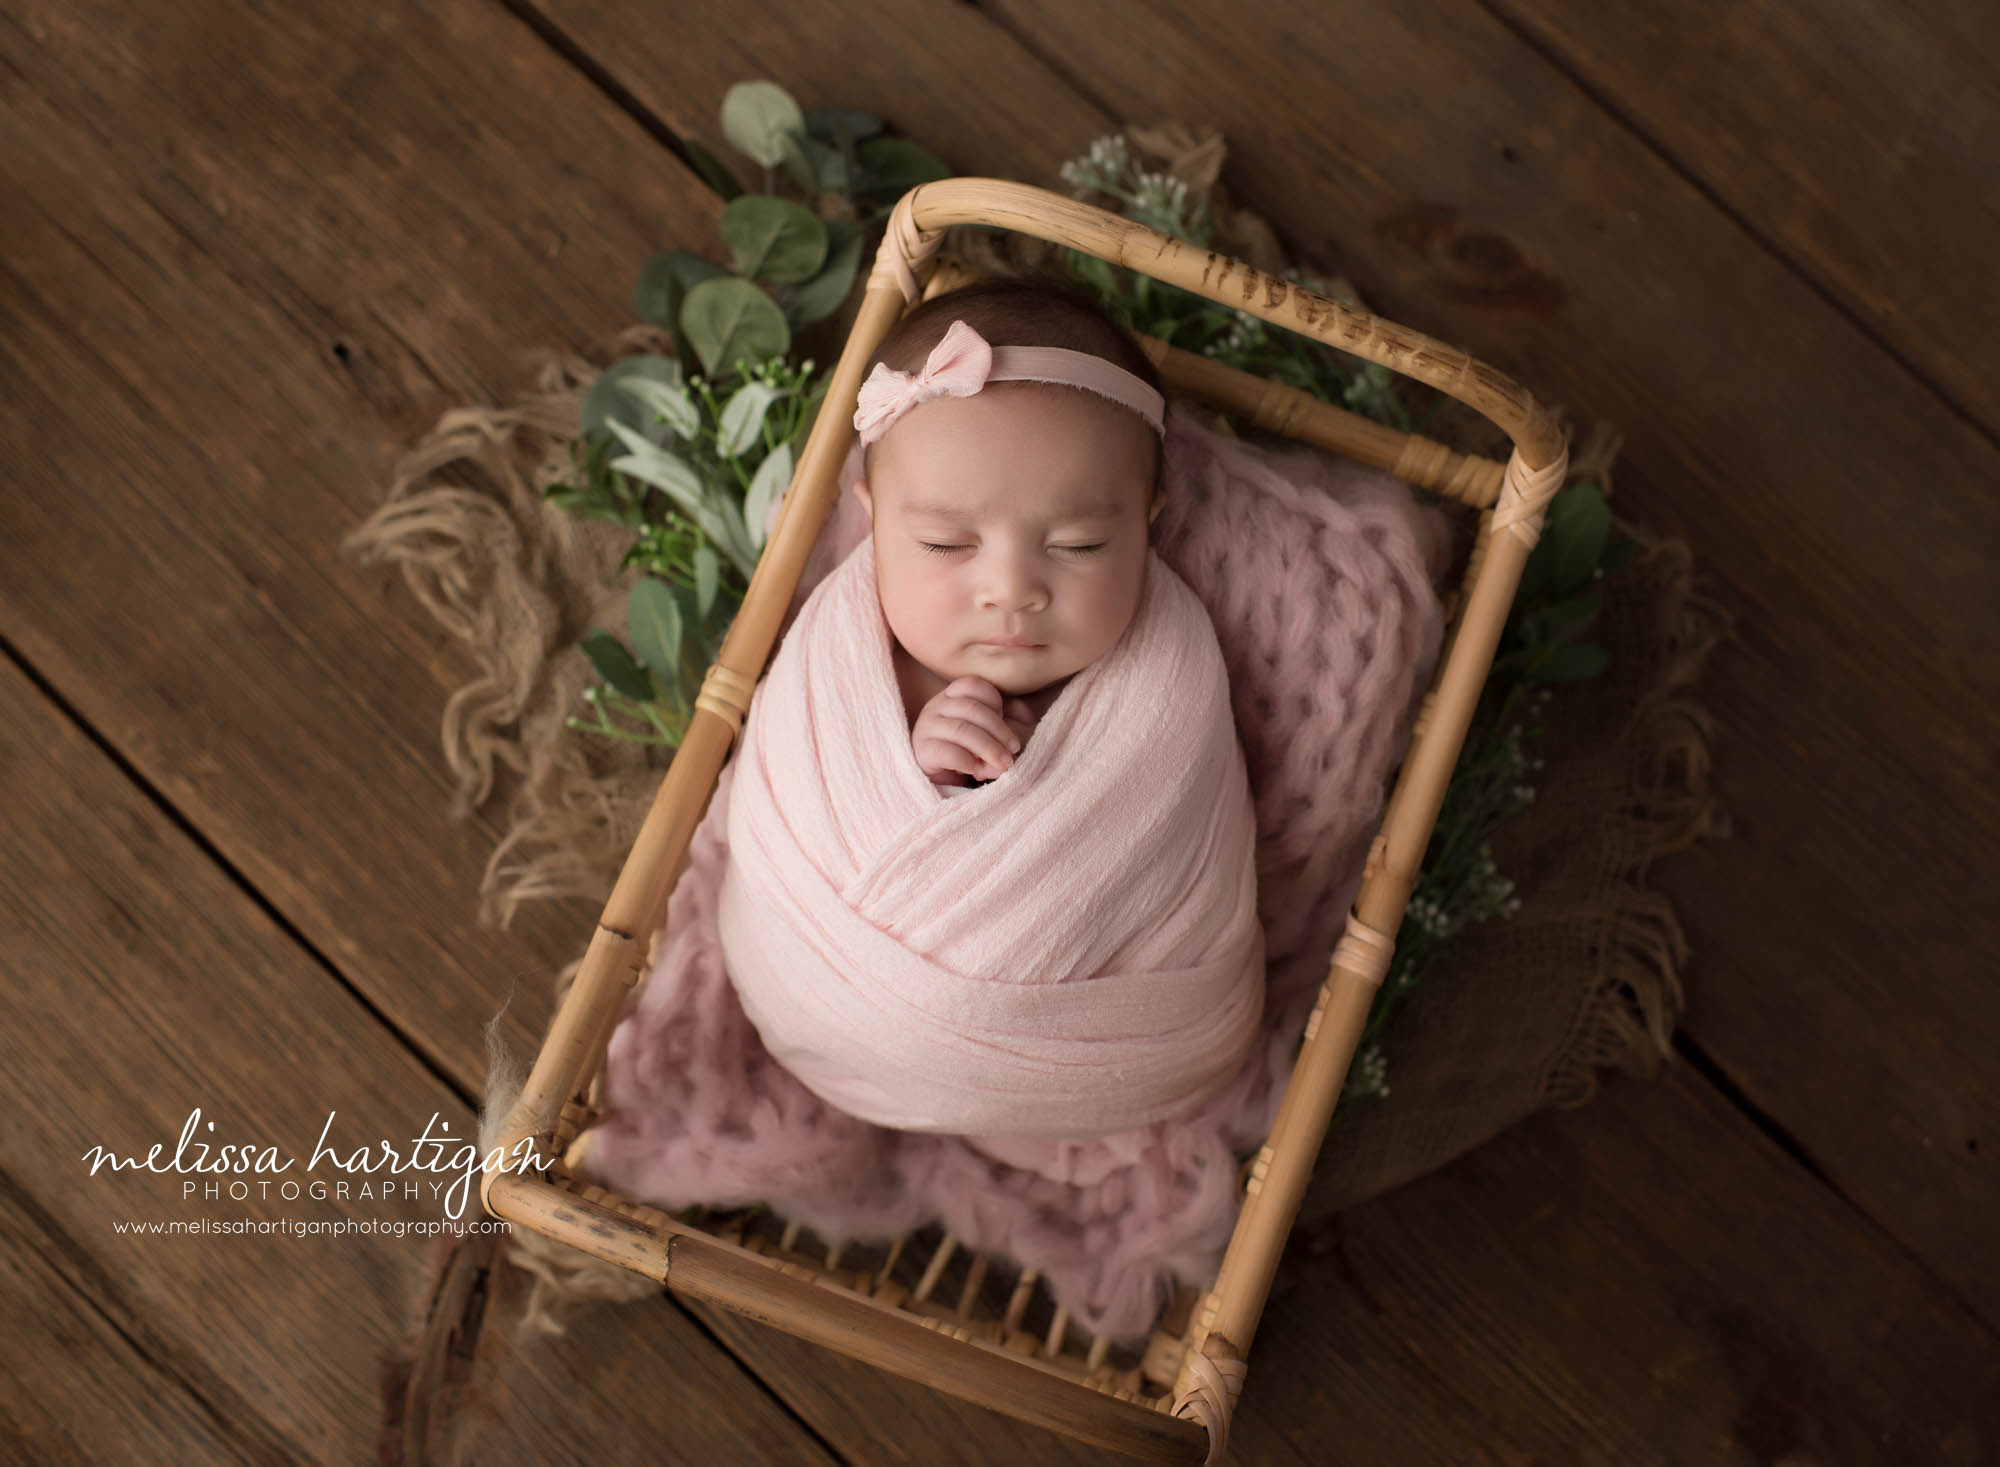 Newborn baby girl wrapped in light pink wrap with green foilage elements windsor newborn photographers